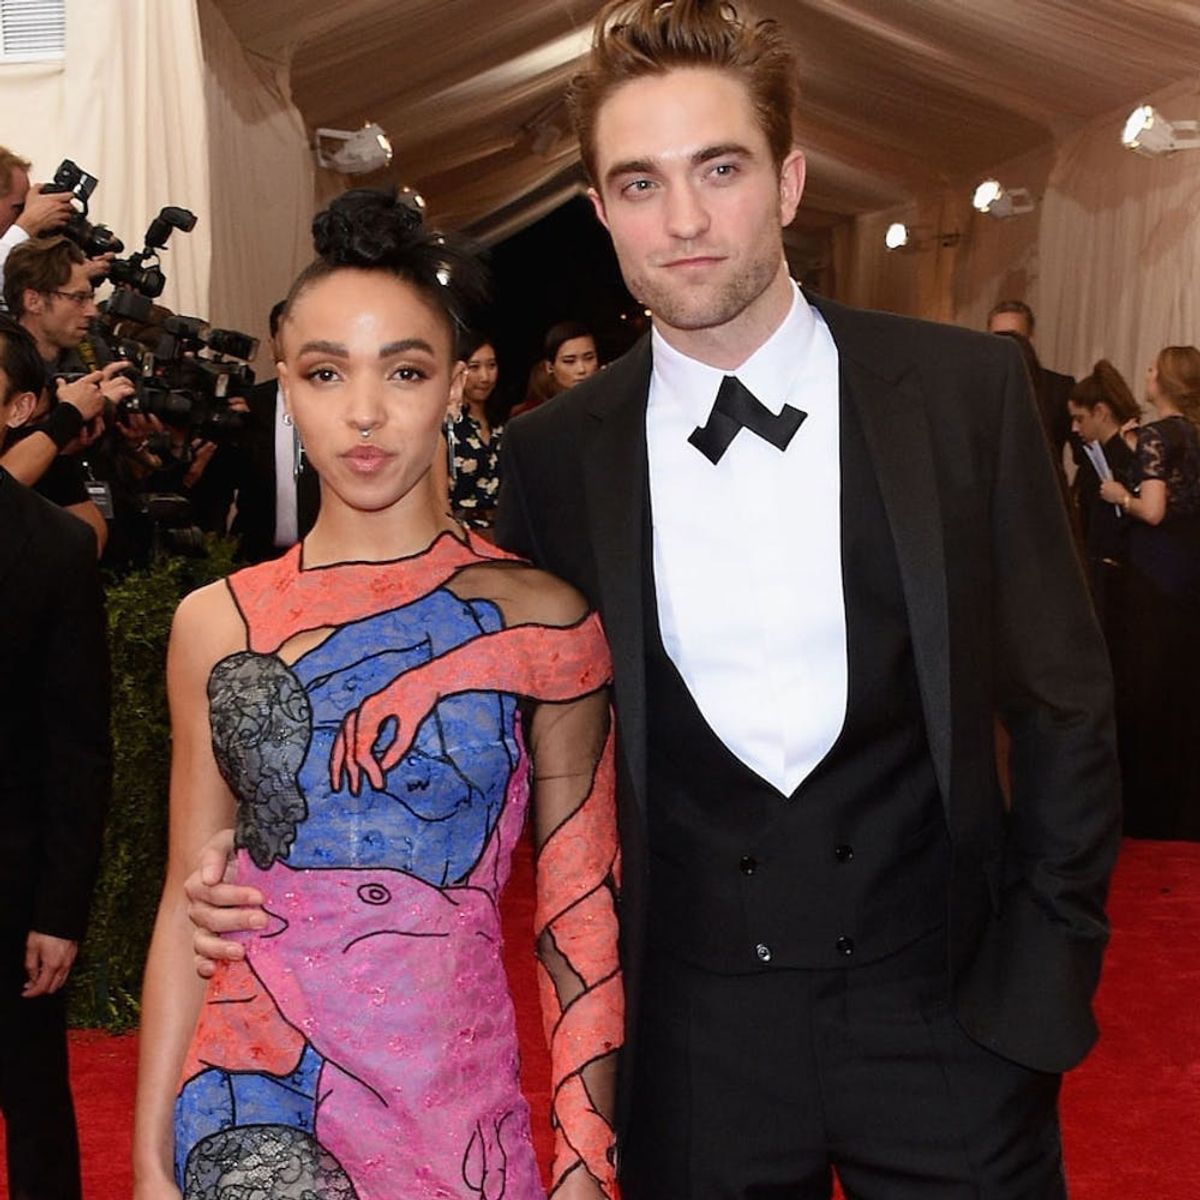 Robert Pattinson Says He’s “Kind of” Engaged to FKA Twigs